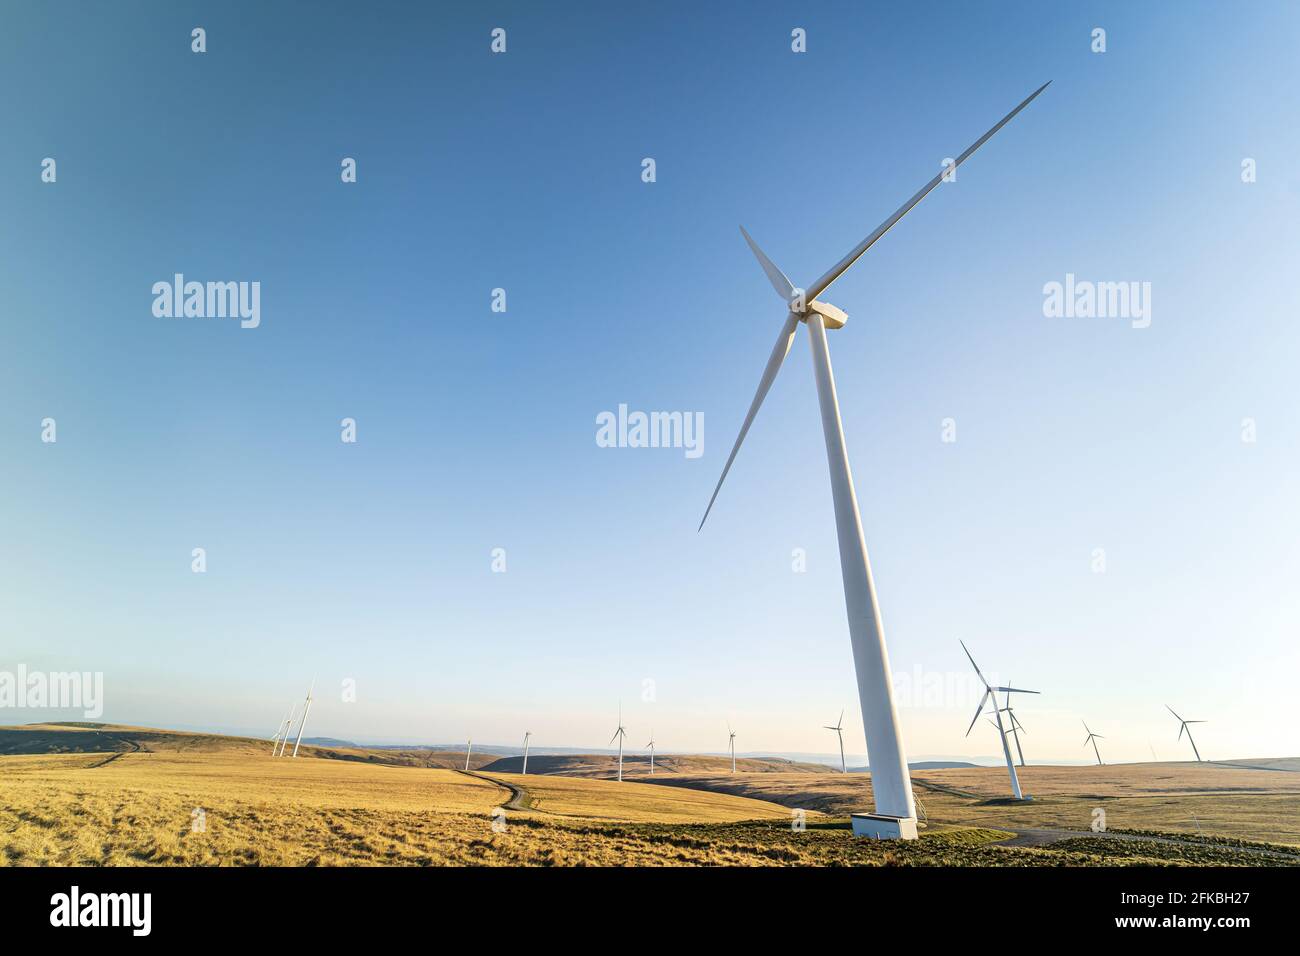 Wind turbines of Mynydd y Betws wind farm, Swansea, Carmarthenshire, South Wales, UK. Sustainable renewable energy source, effects on the environment Stock Photo